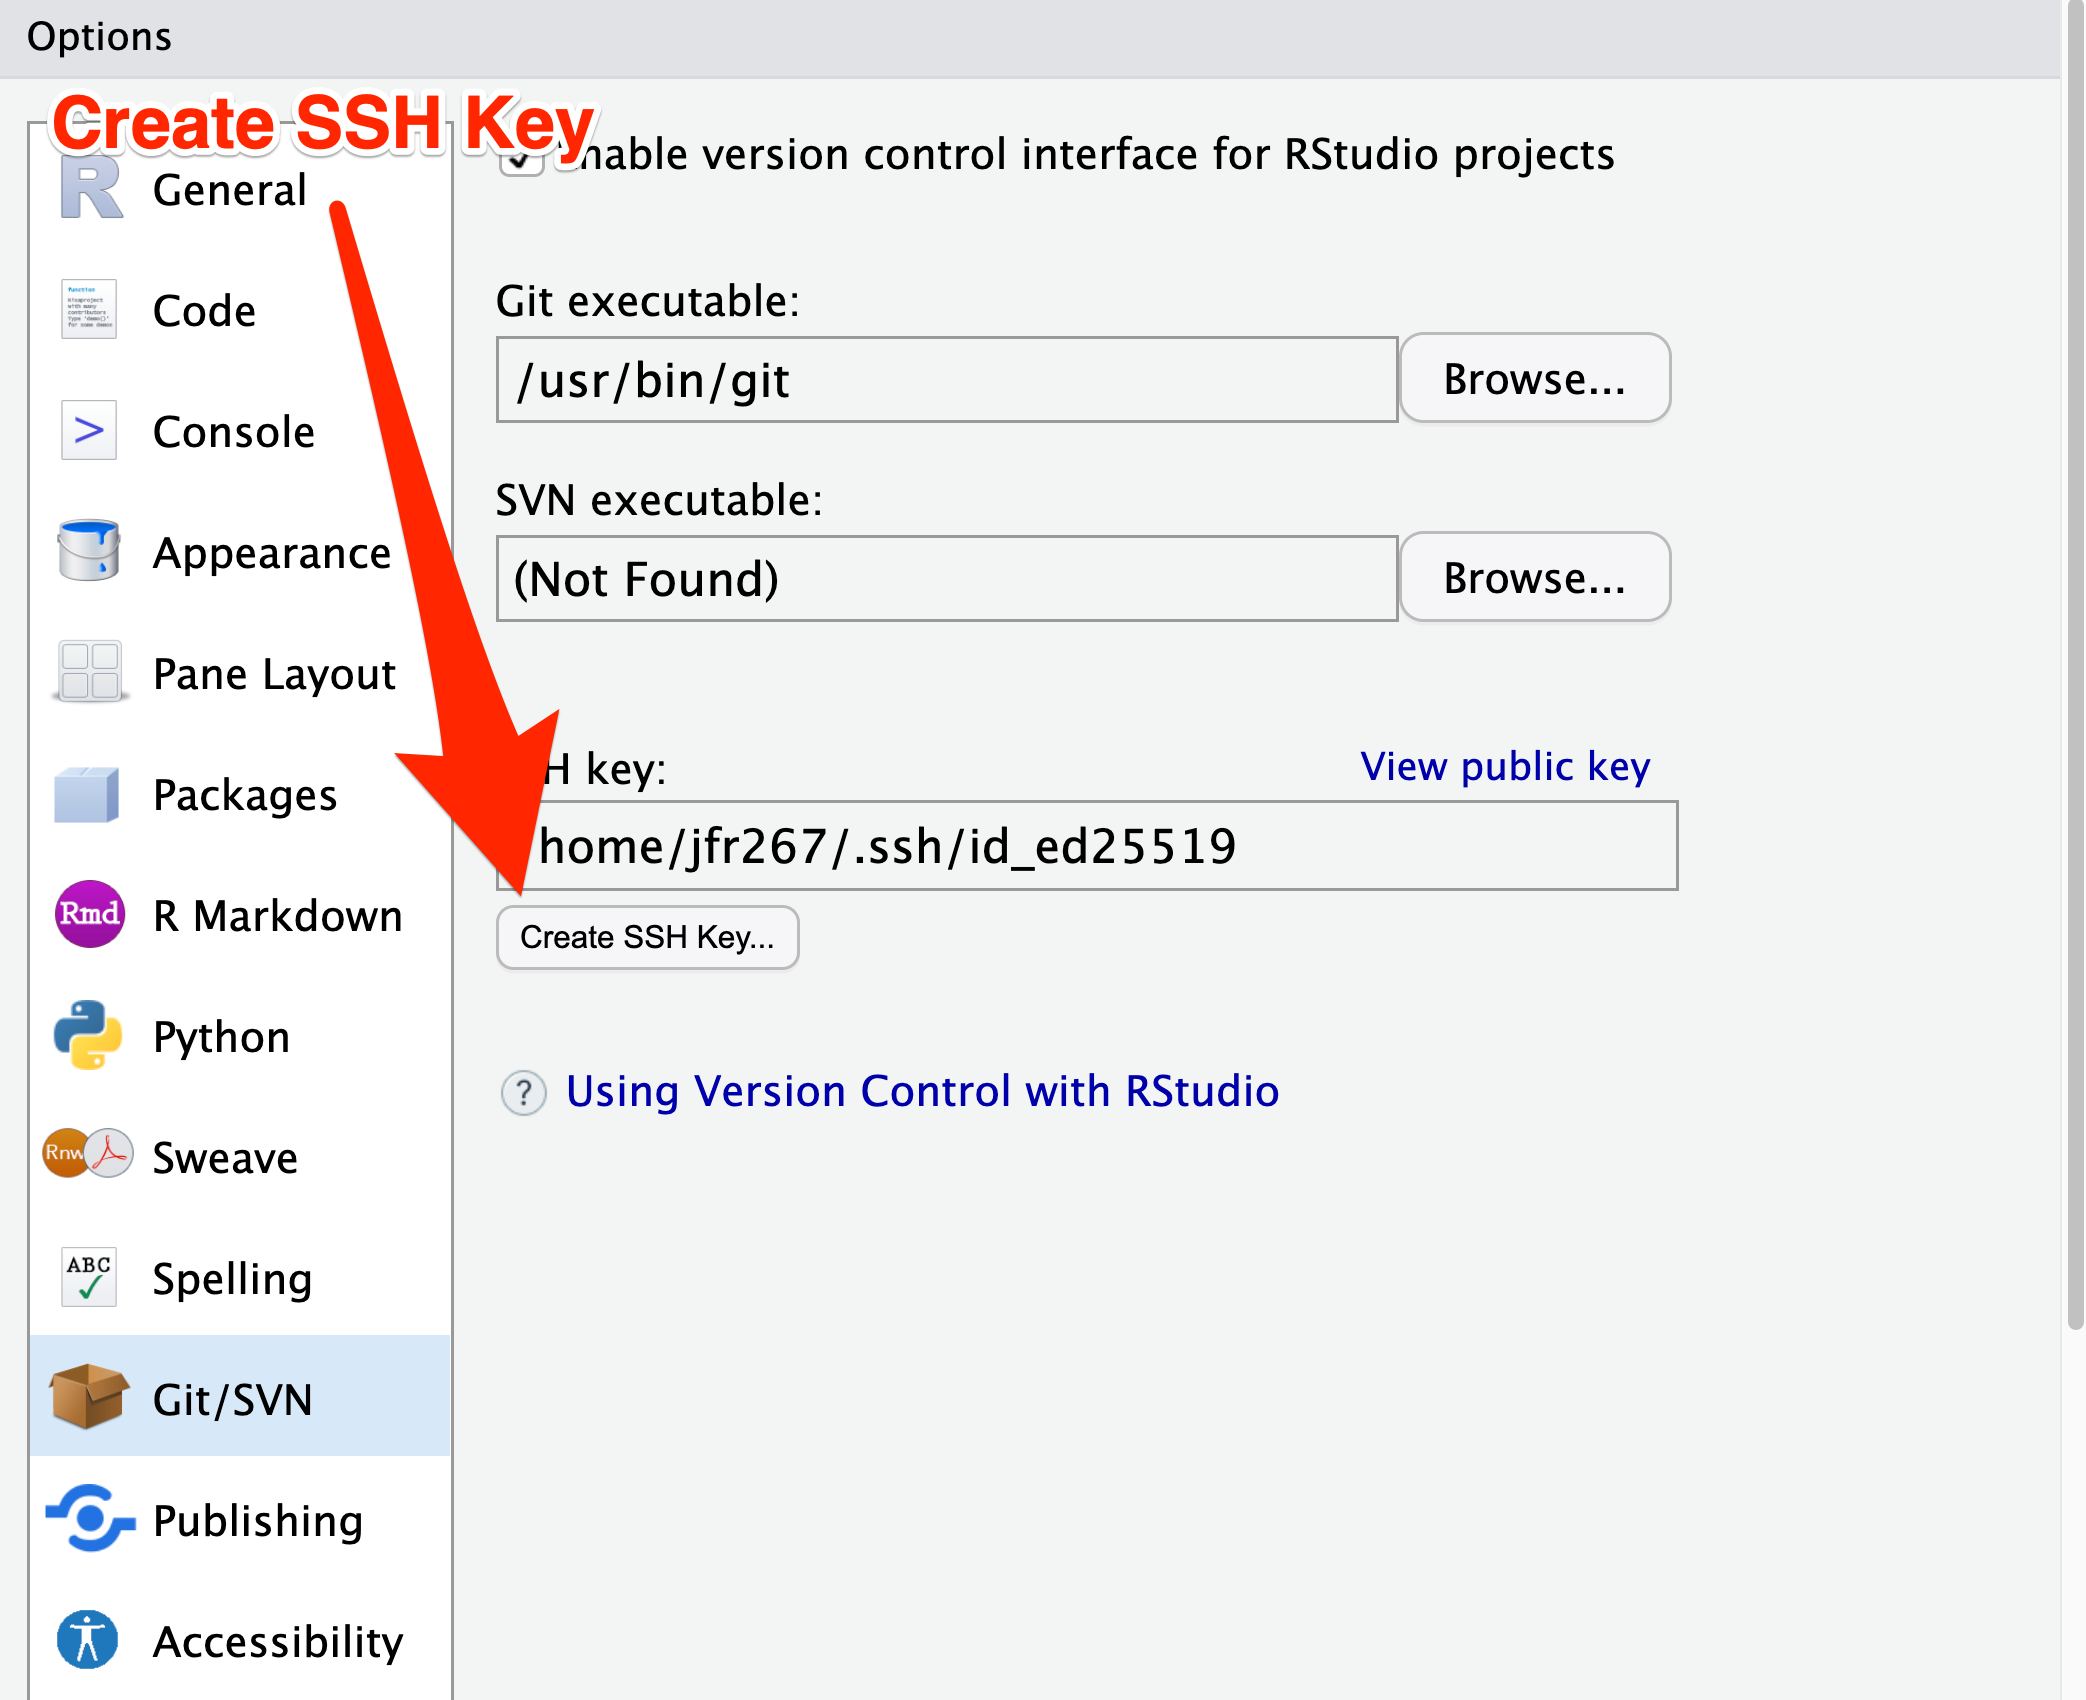 A screenshot of the RStudio Git/SVN options menu, with Create SSH Key selected